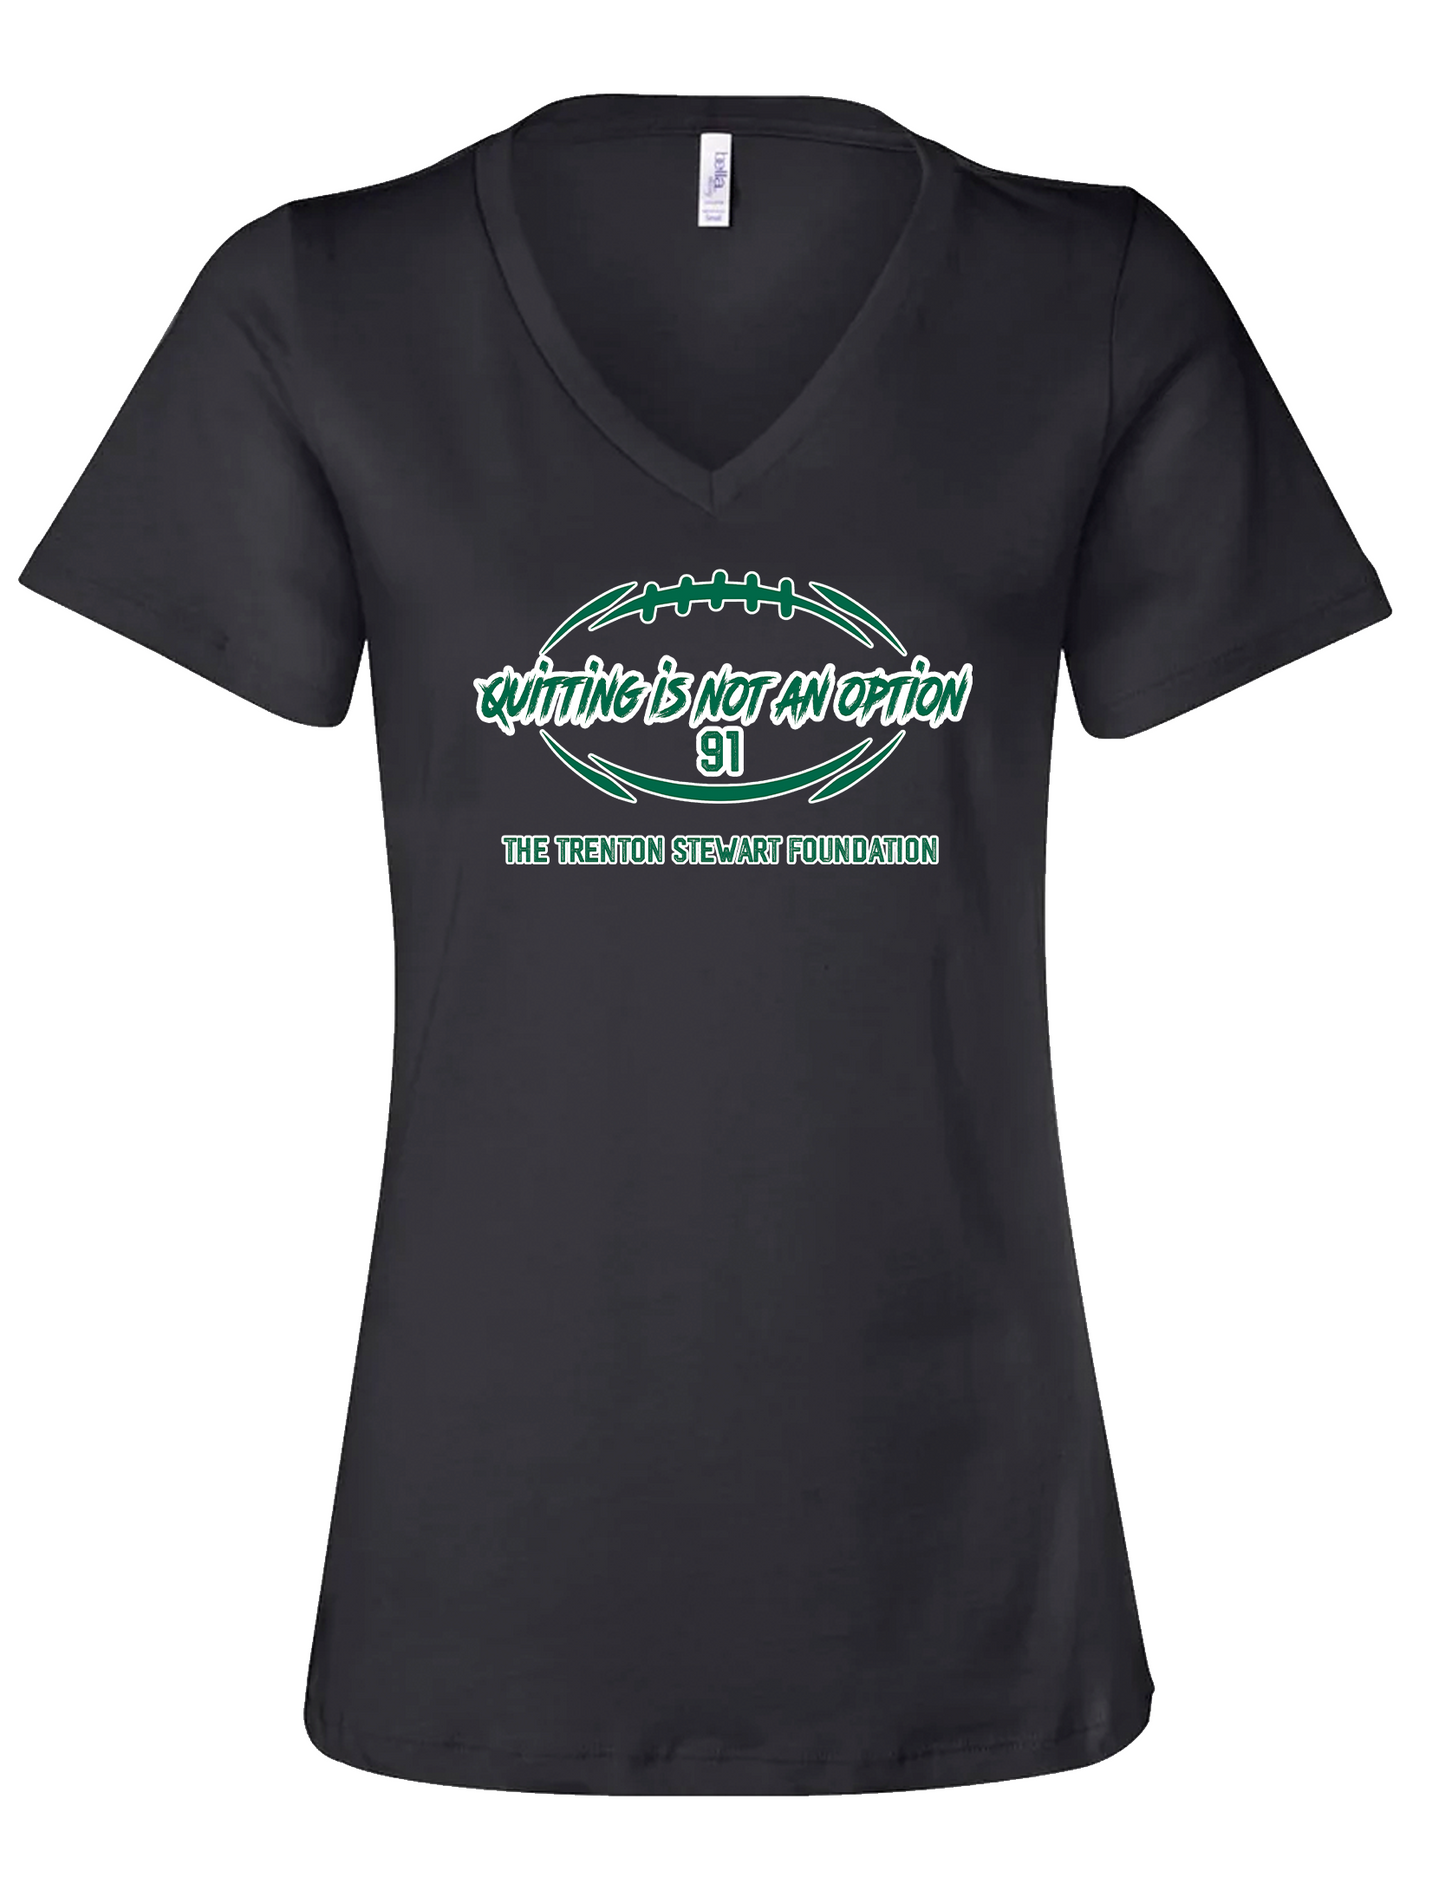 Quitting is not an option - Women V-Neck